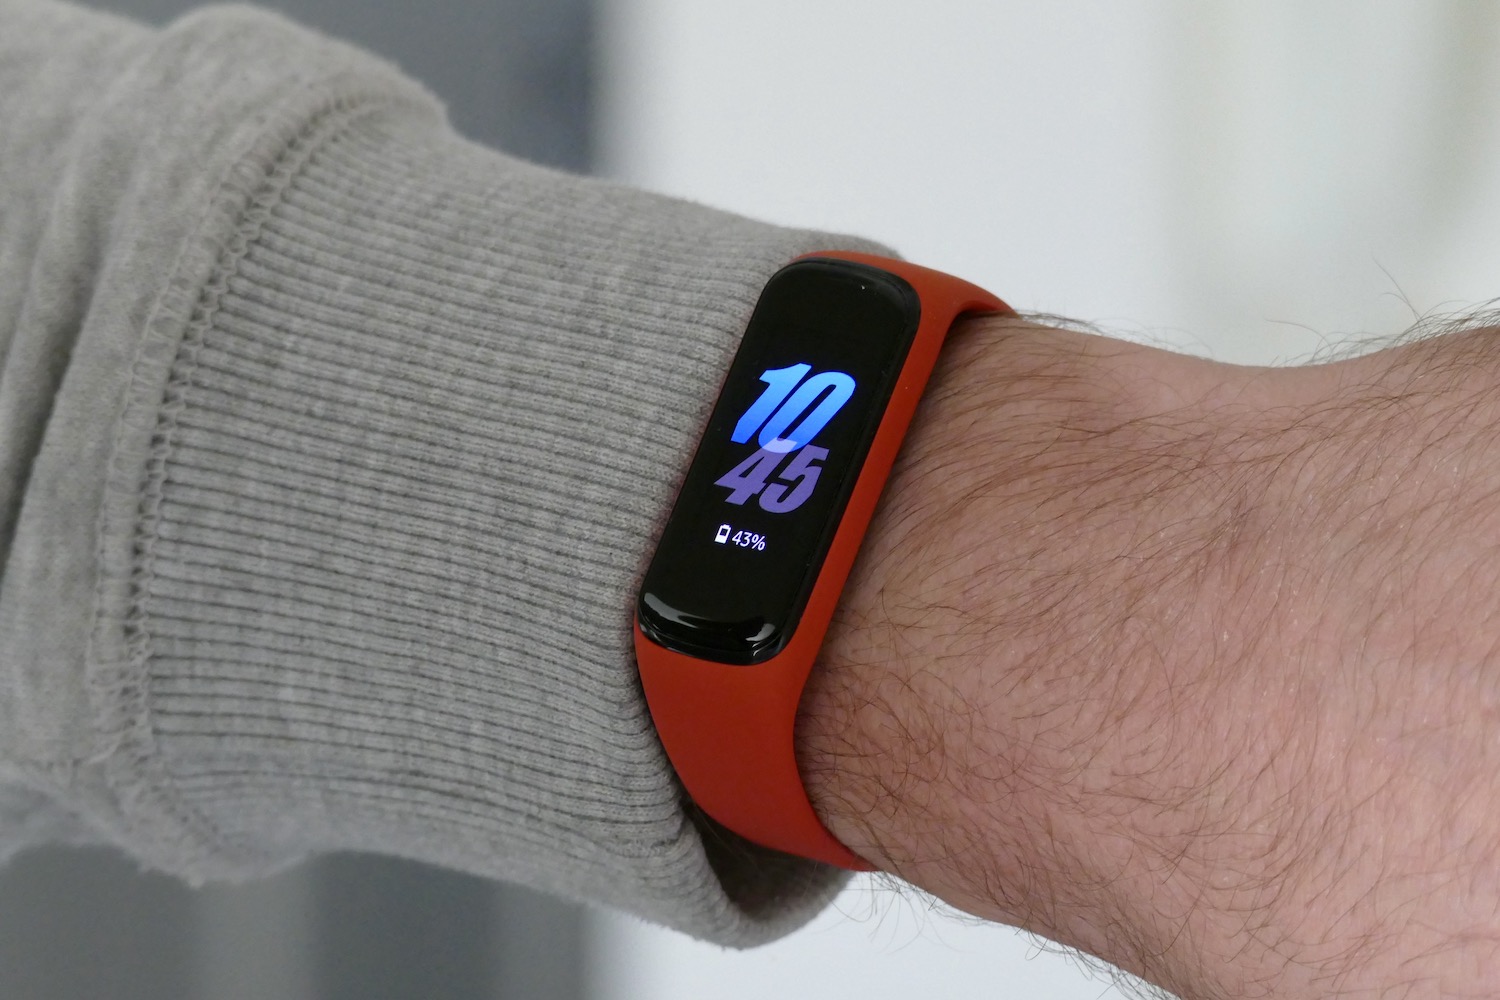 Samsung Galaxy Fit 2 review: Fit for the basics